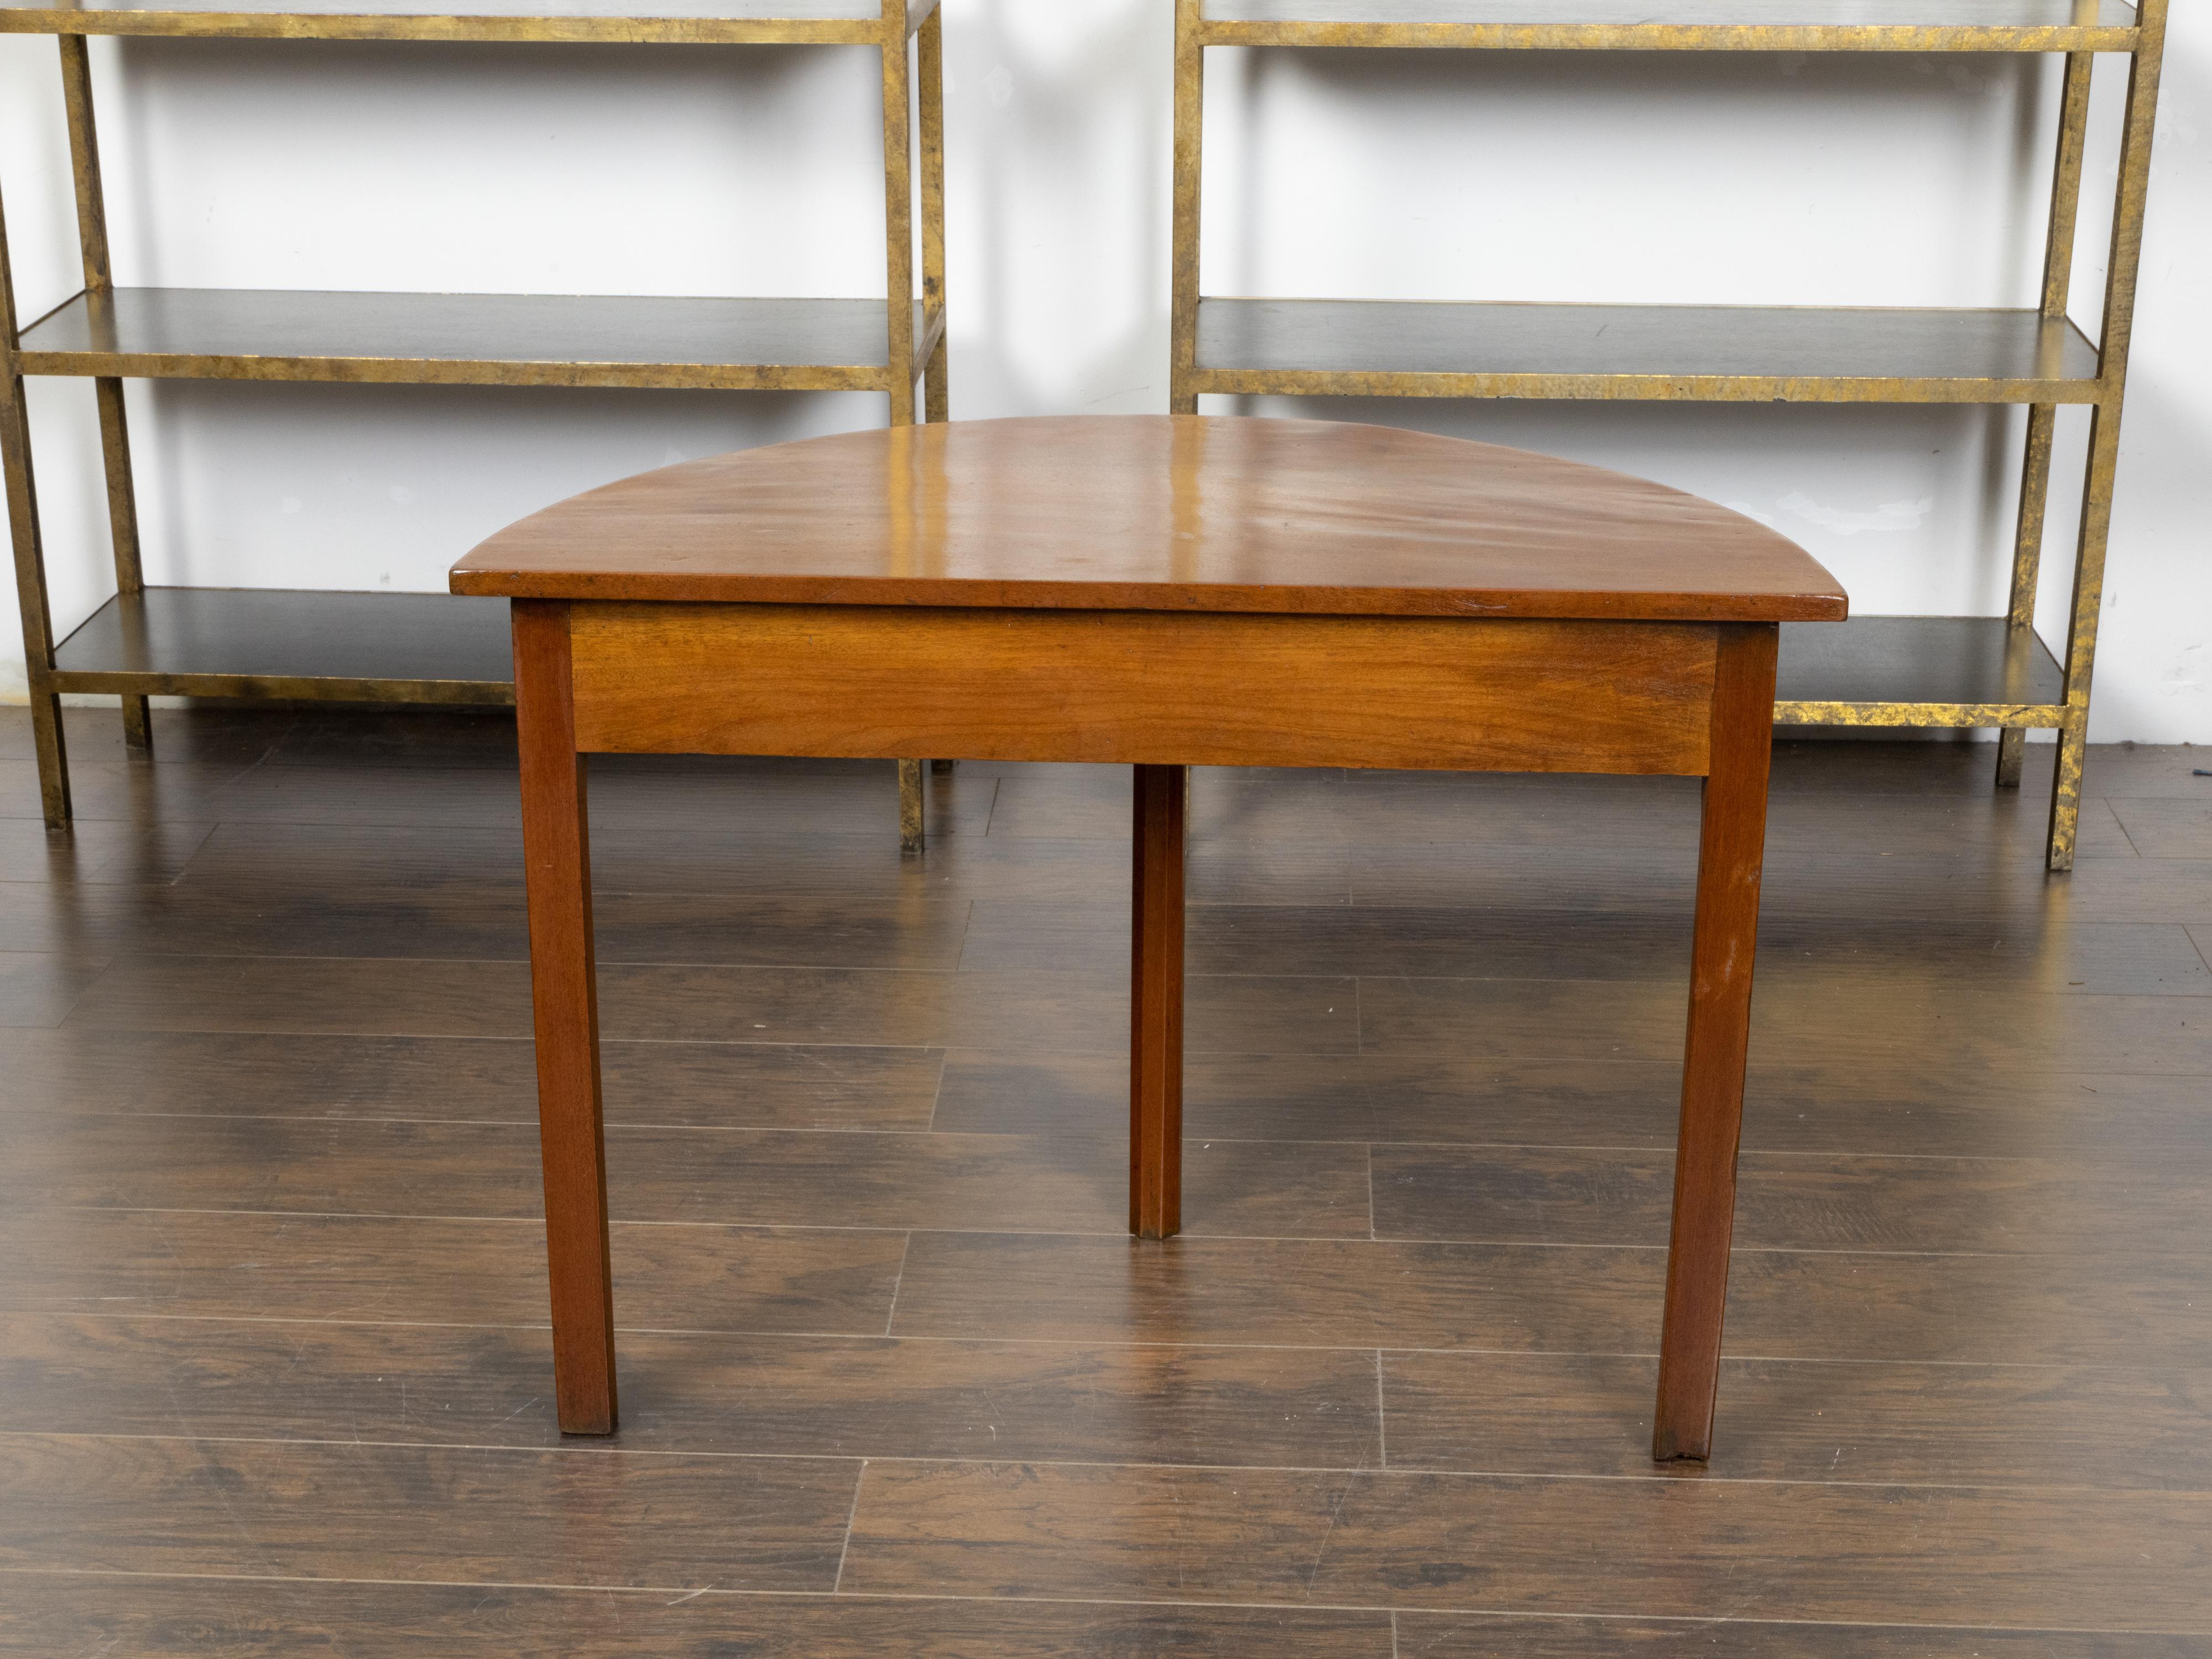 English 19th Century Mahogany Demilune Table with Carved Apron and Straight Legs For Sale 1